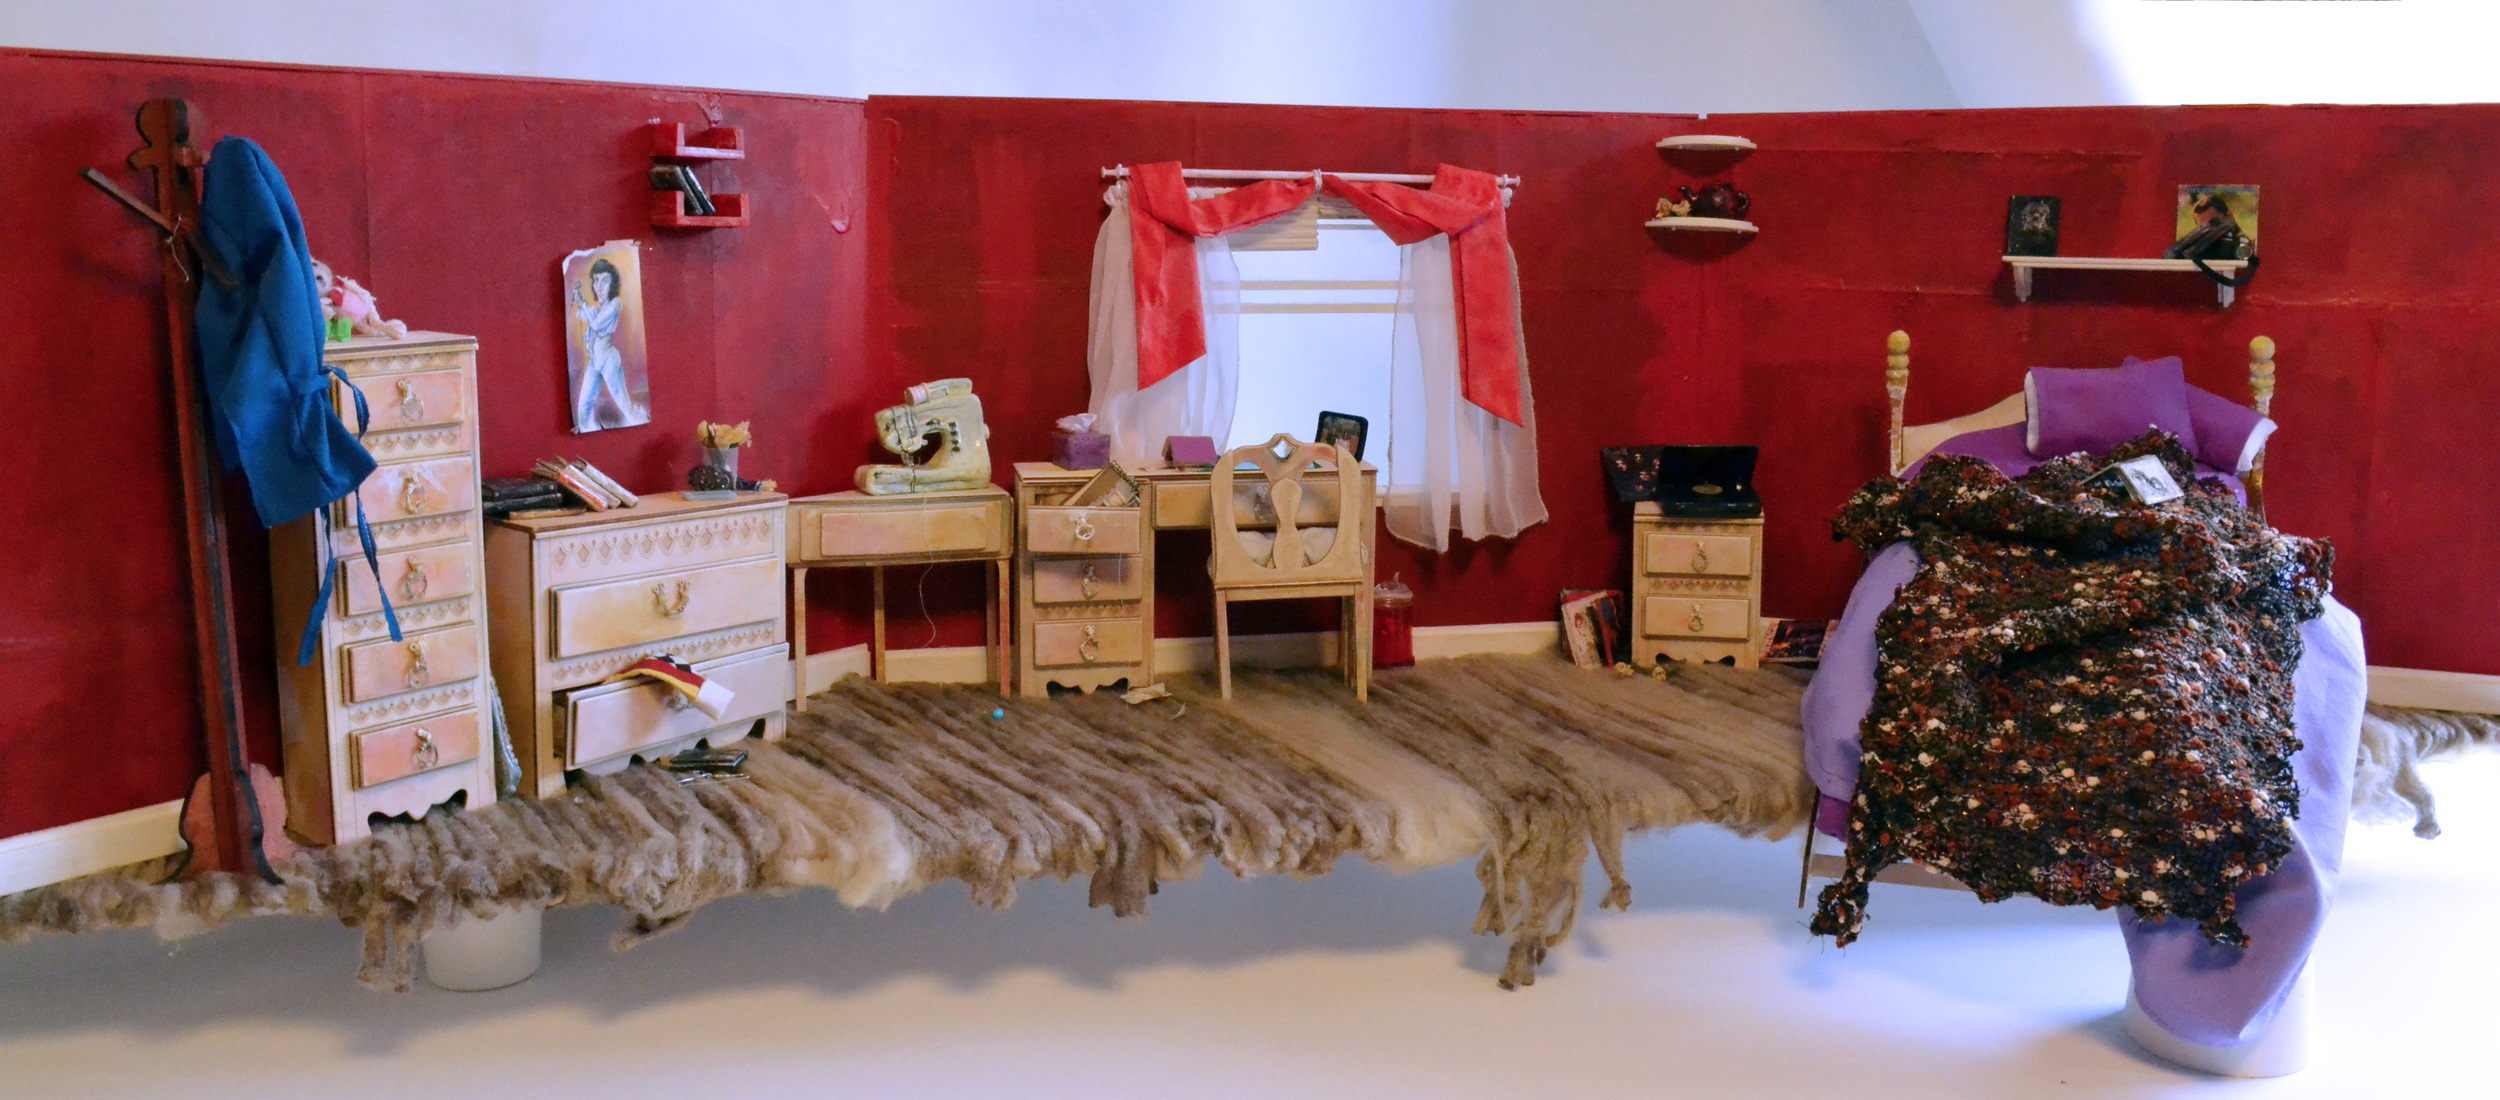  Stop motion, panoramic style bed room set.&nbsp;  All objects are handmade and are inspired by the objects within my own room.&nbsp;  Wood furniture and shelves are laser- cut and hand painted. 